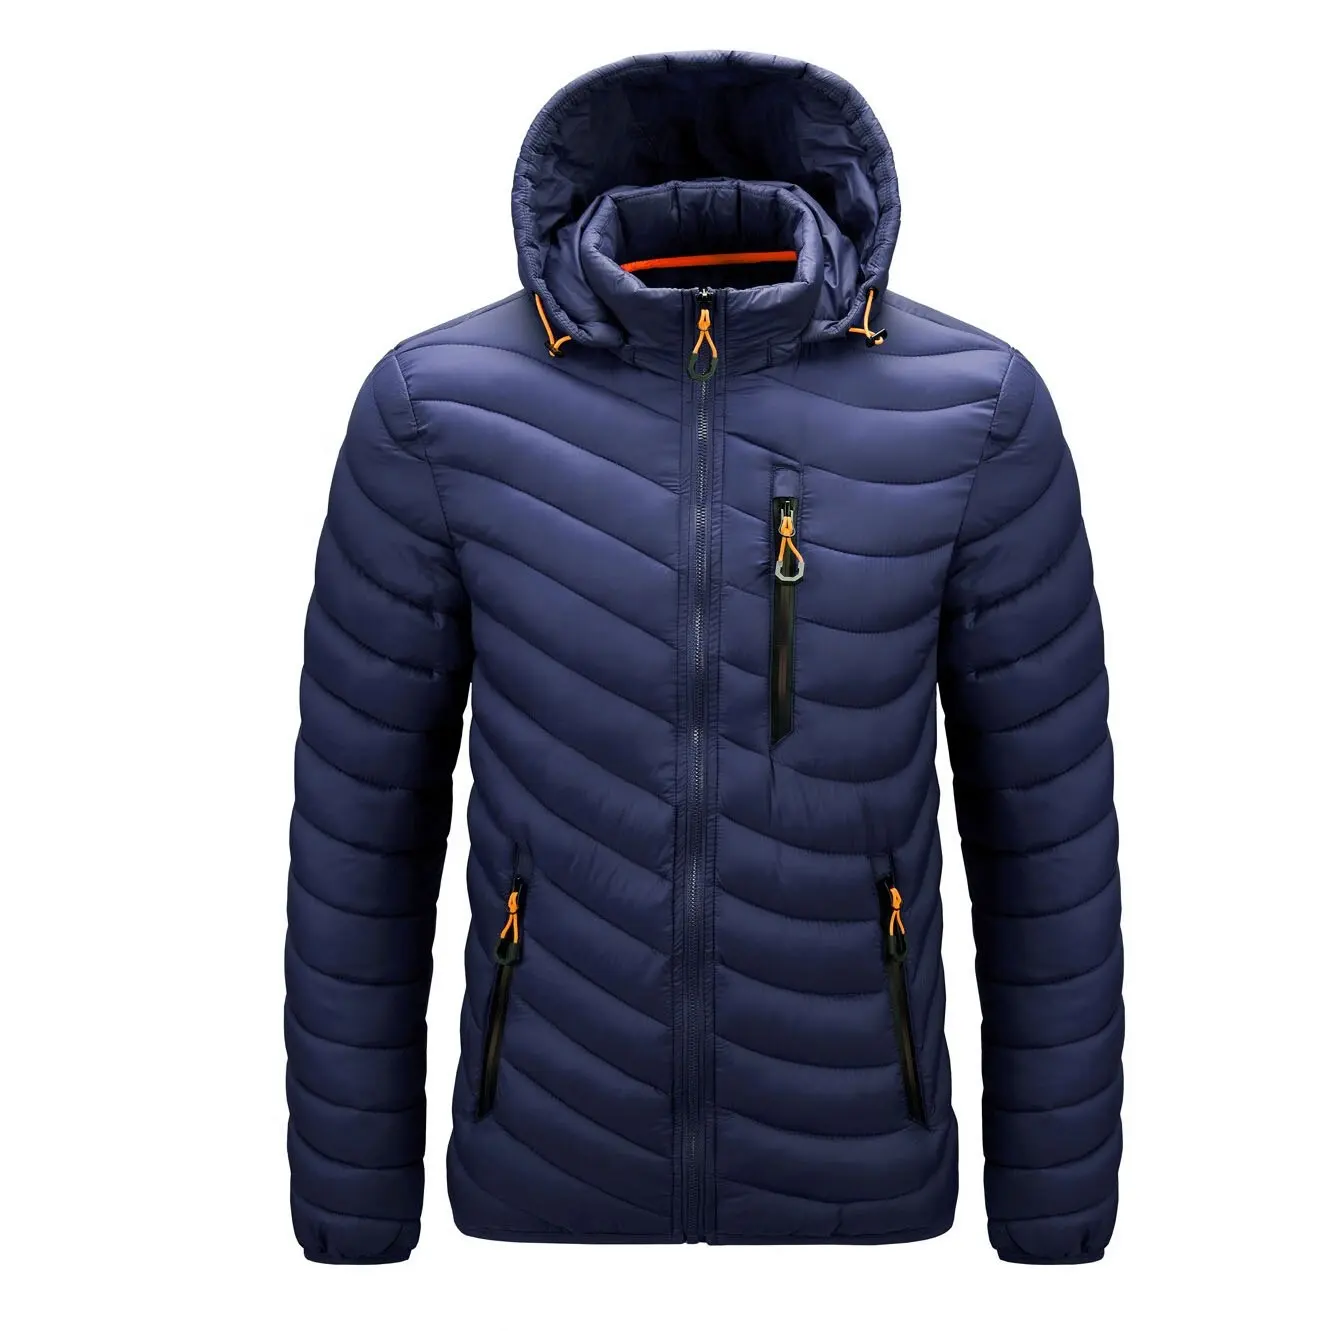 Men's Thicken Puffer Jacket Insulated Water-Resistant Warm Winter Coat with Hood Men Custom High Quality Ultralight